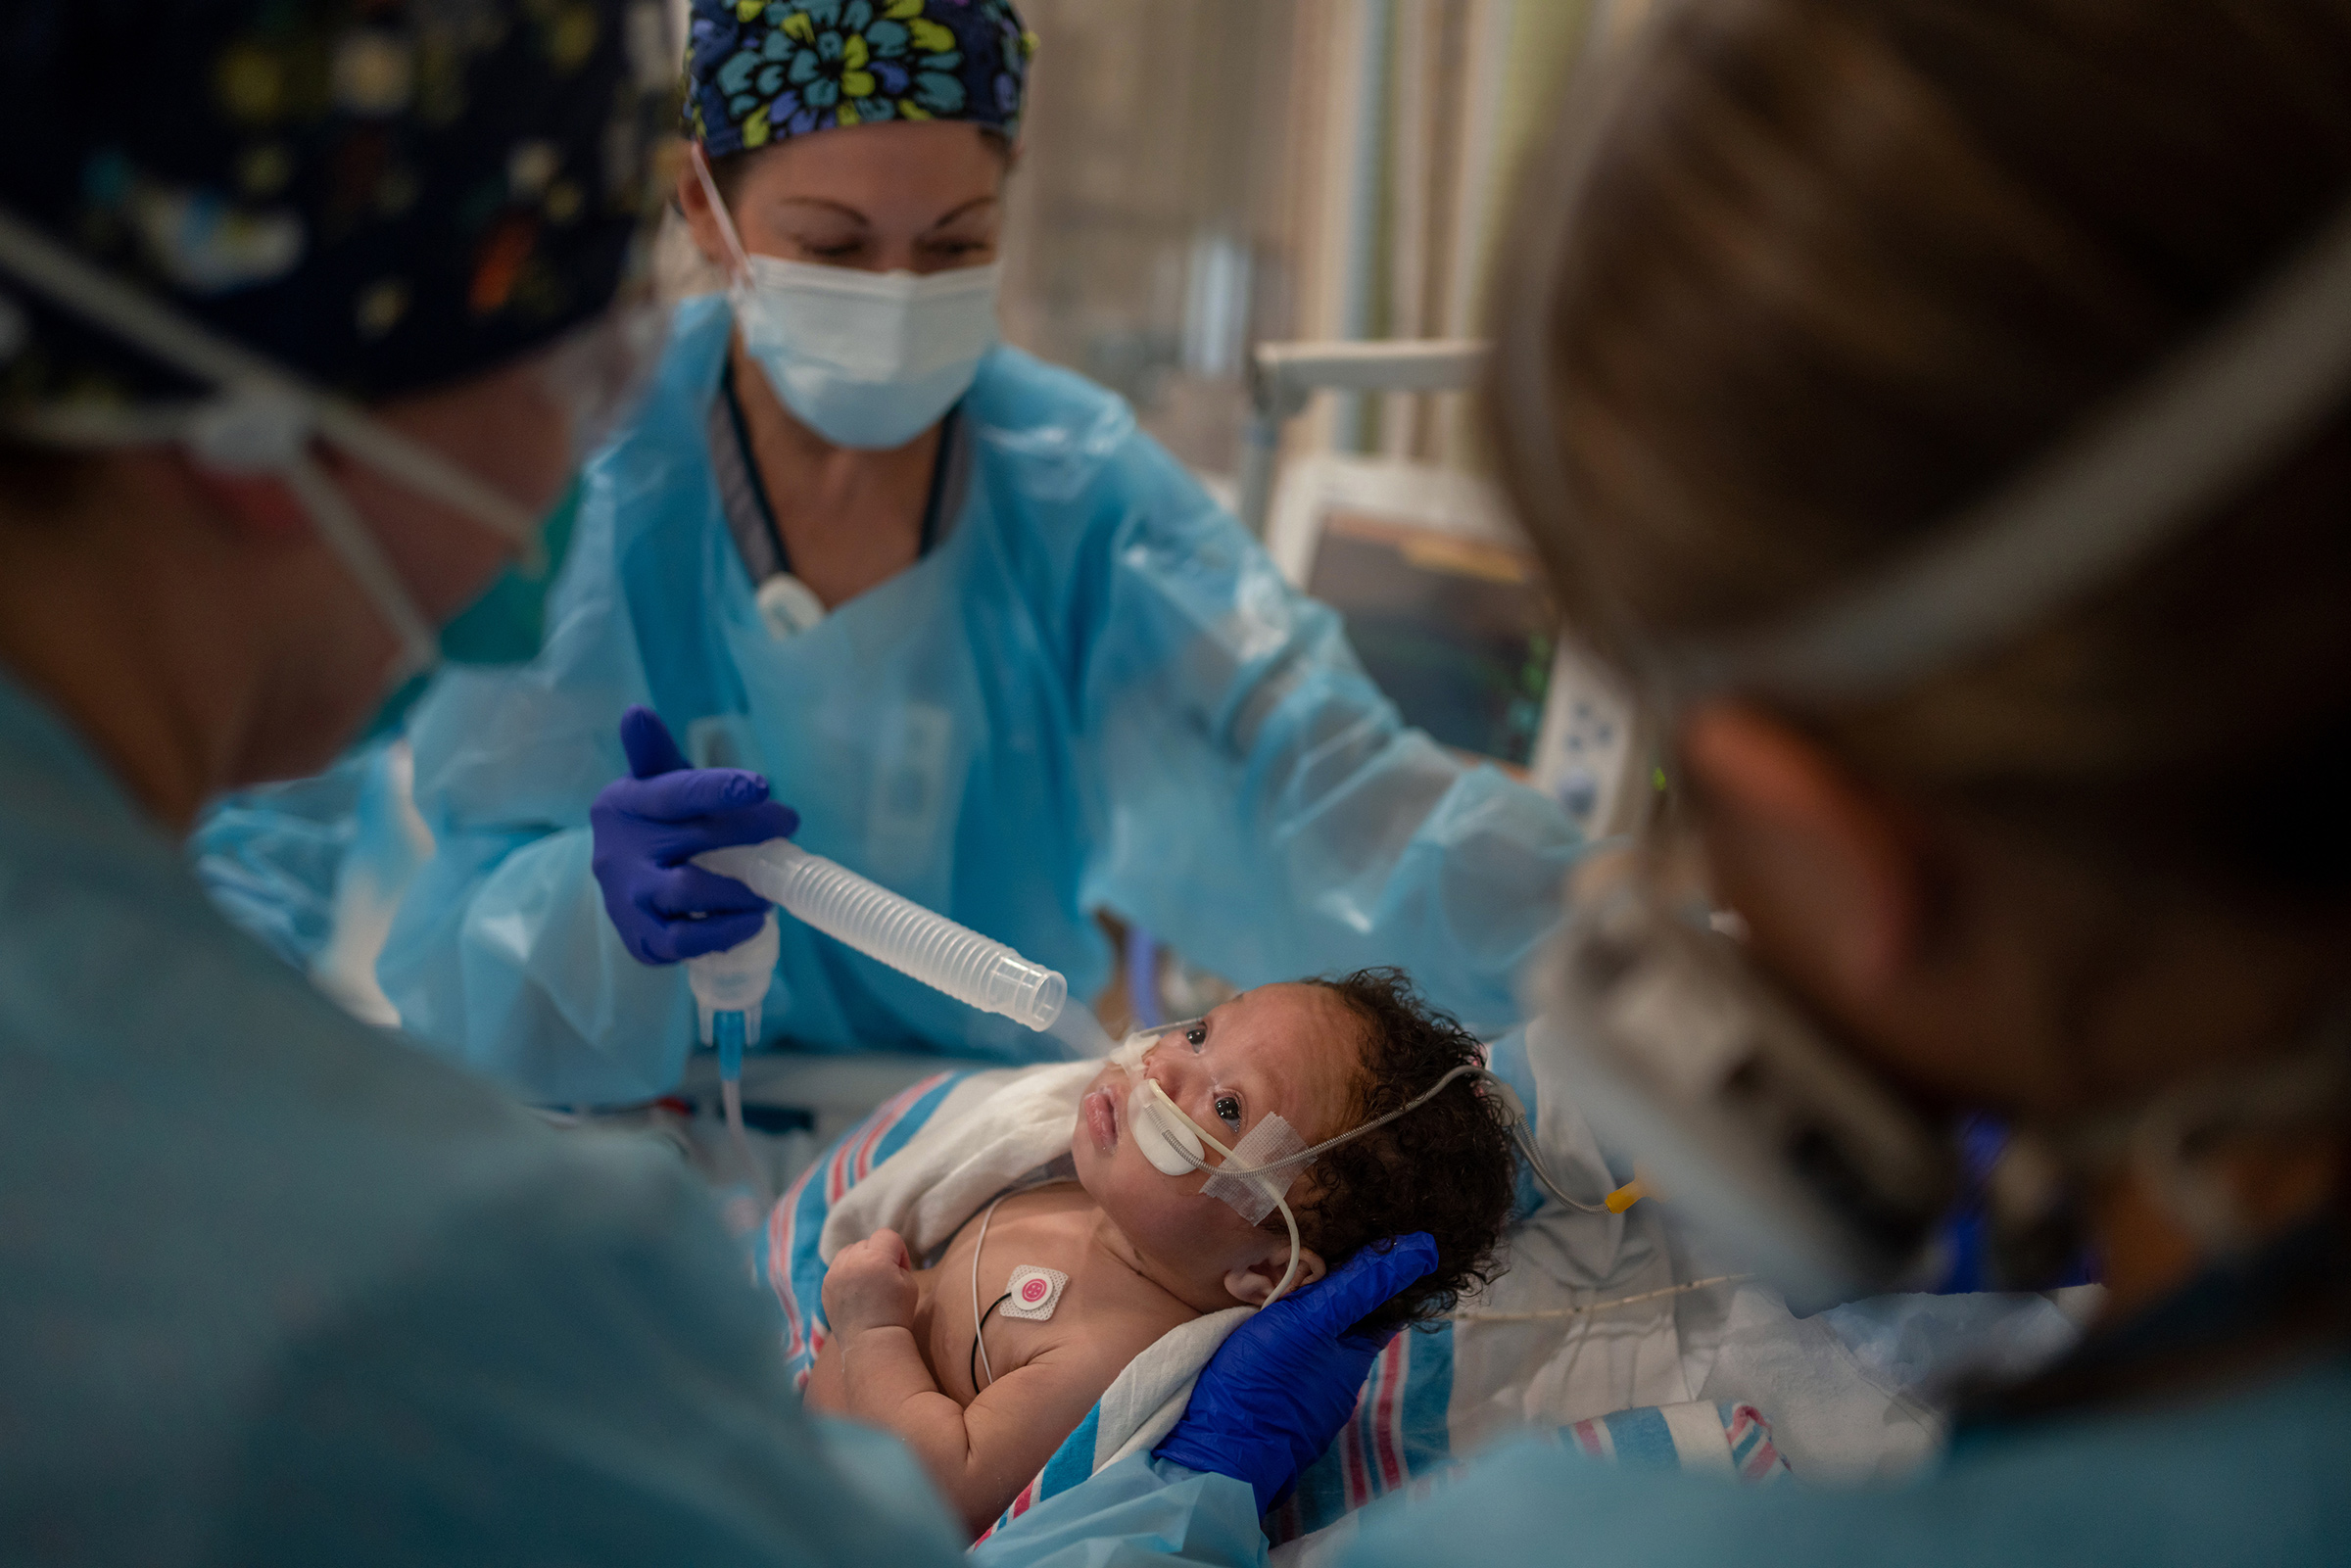 Respiratory therapist Diane Gelpi administers oxygen to two-month-old Carvase Perrilloux after he was taken off a ventilator at Children’s Hospital New Orleans on Aug. 20, 2021.